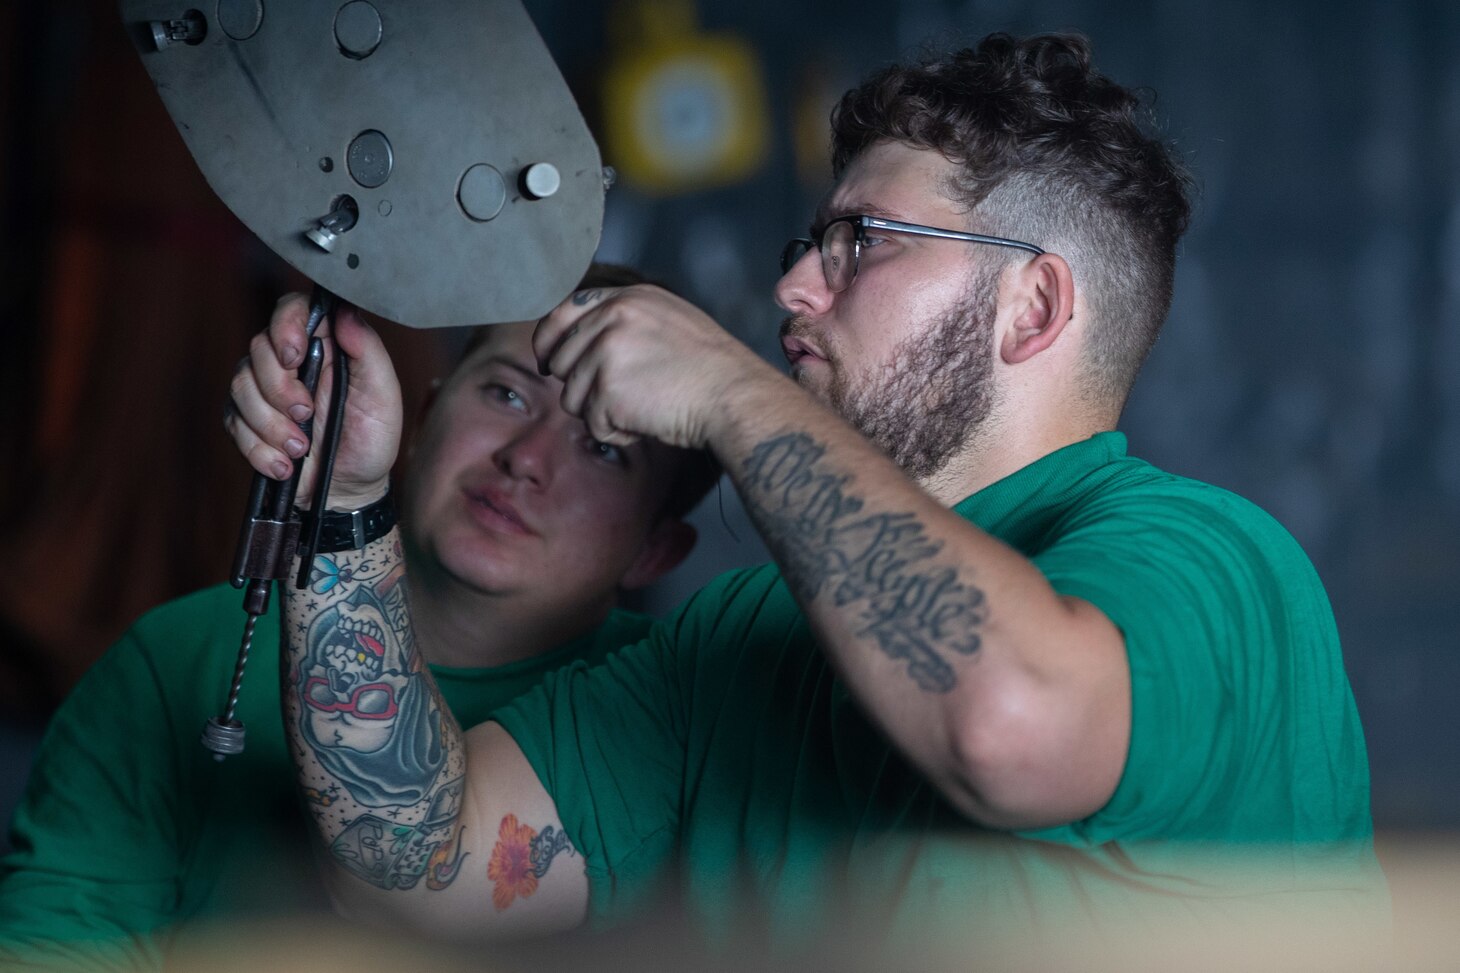 Aviation Structural Mechanic Airman Jordan Dicker, right, from Sebastian, Florida, and Aviation Structural Mechanic 3rd Class Brandon Coffman, from Morrow, Ohio, both assigned to the "Blacklions" of Strike Fighter Squadron (VFA) 213, perform routine maintenance on a F/A-18F Super Hornet in the first-in-class aircraft carrier USS Gerald R. Ford's (CVN 78) hangar bay, Oct. 8, 2022.